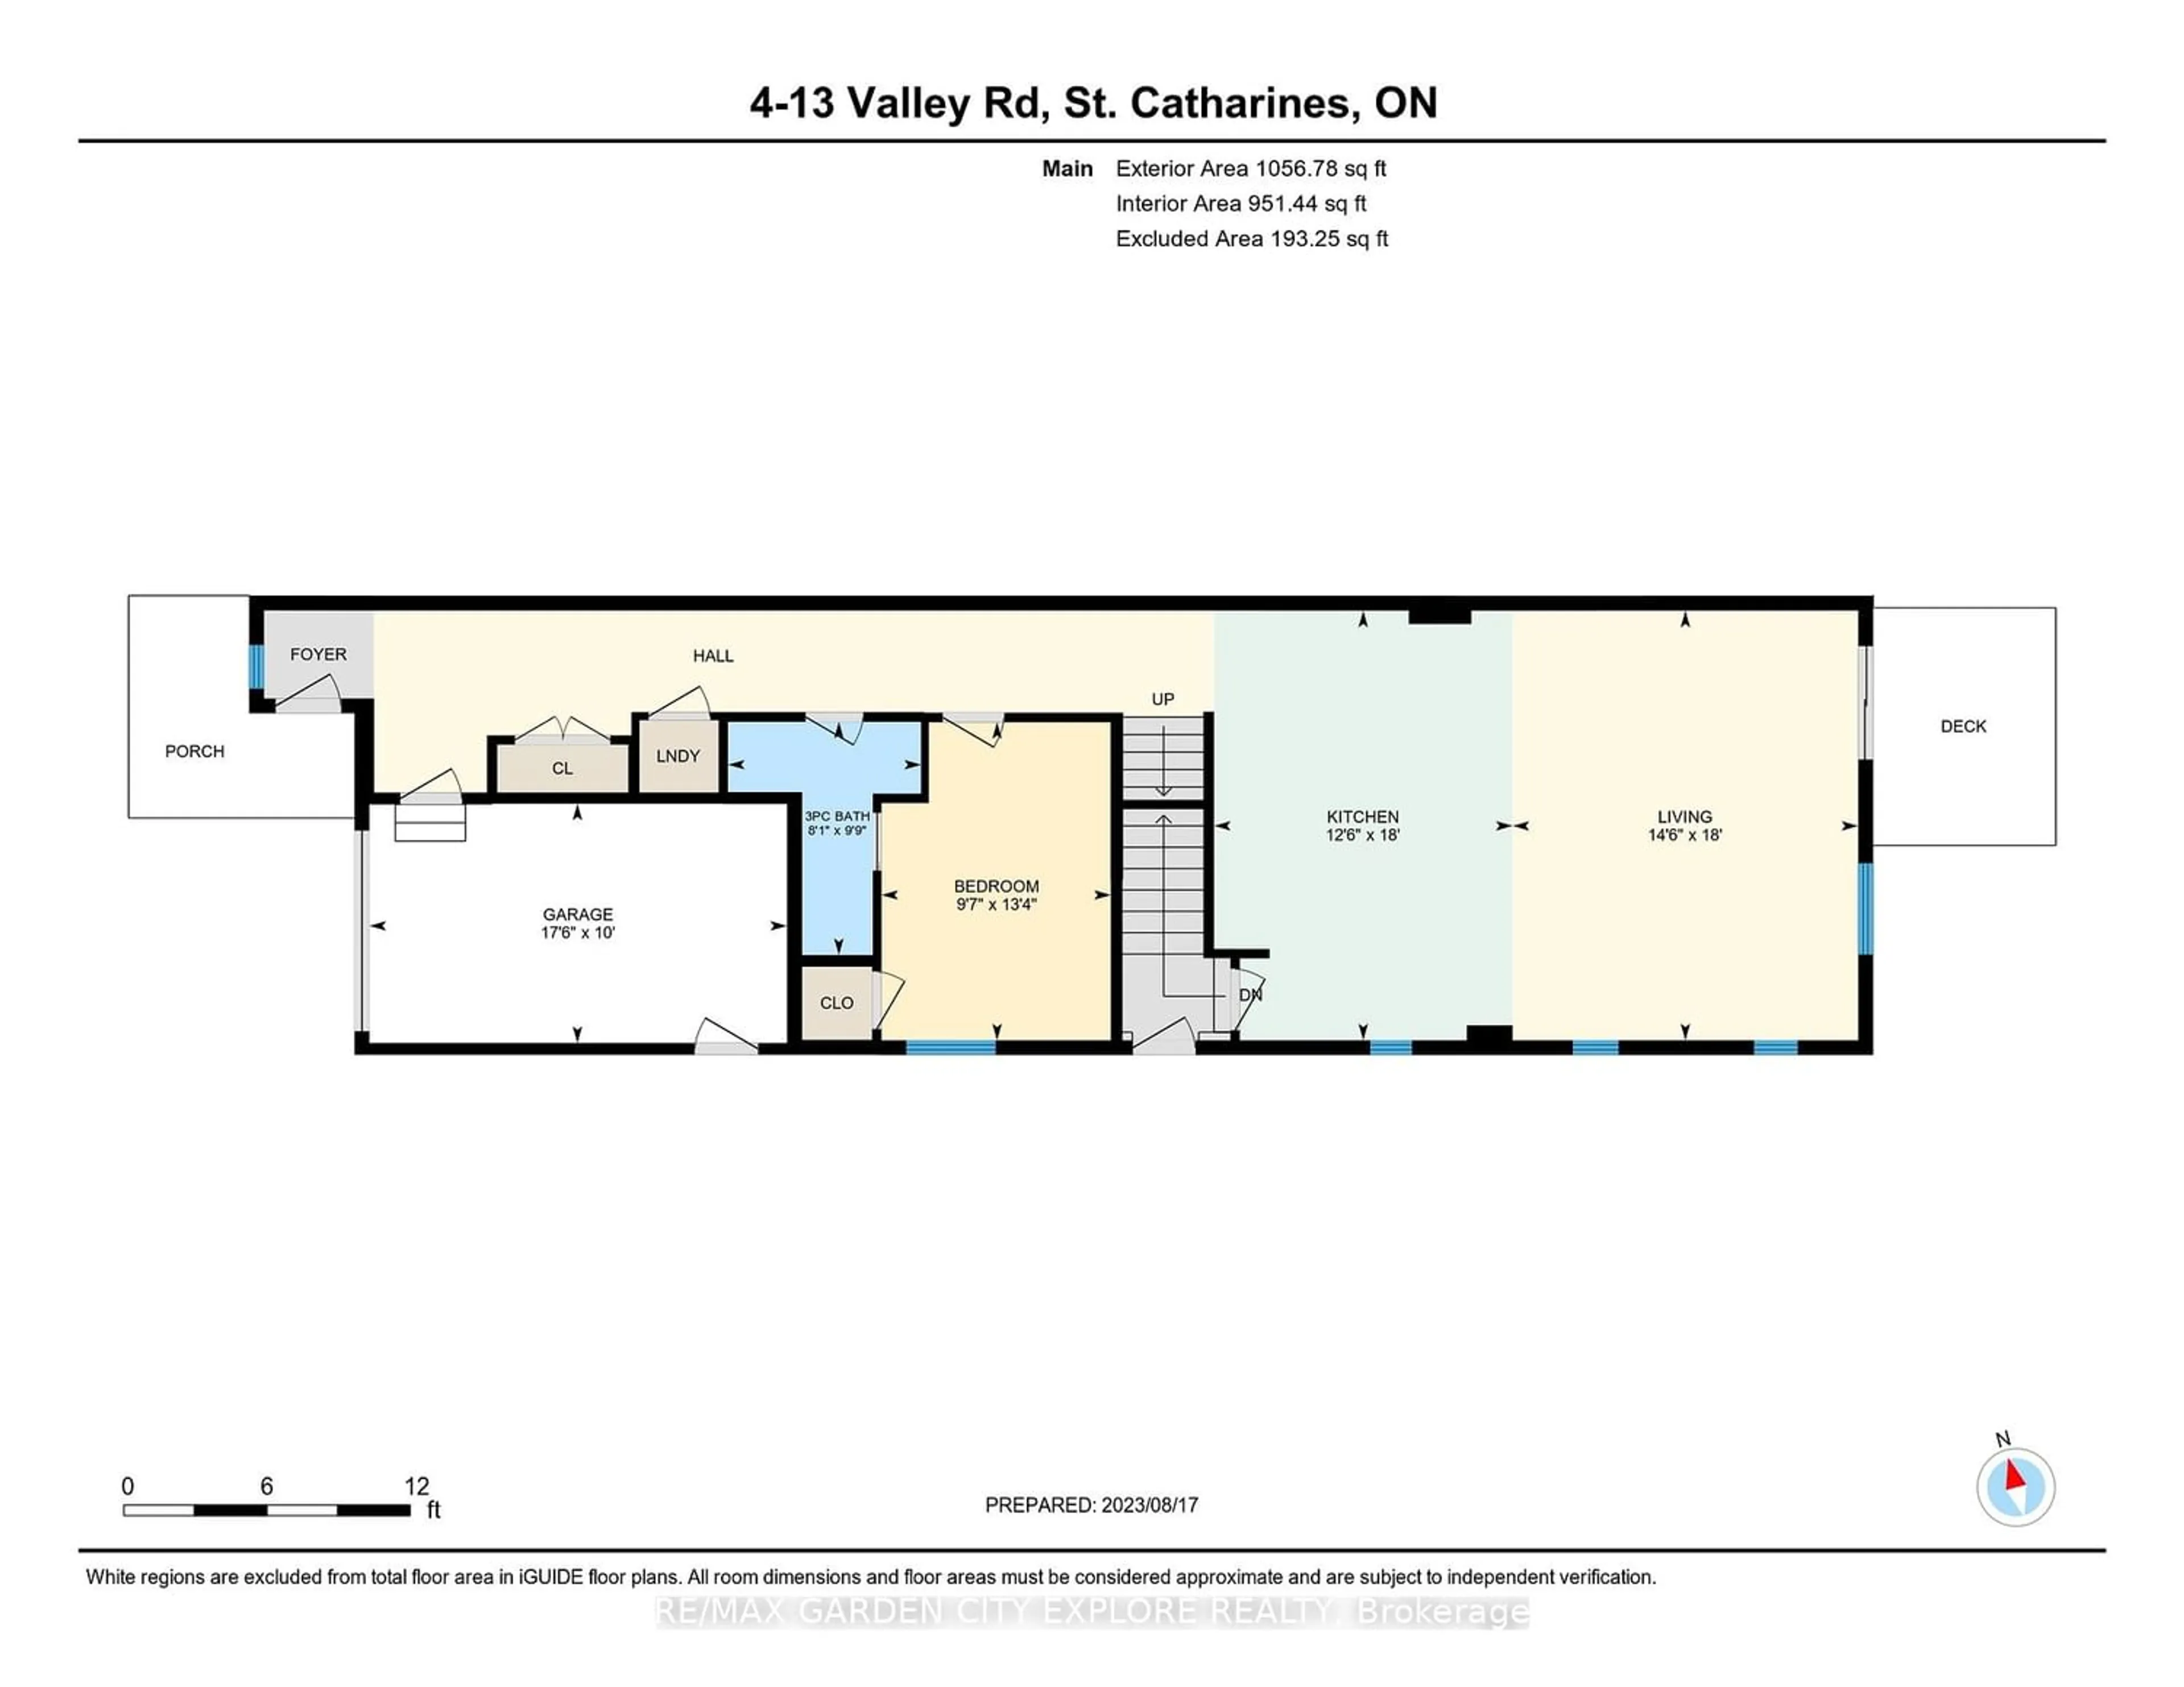 Floor plan for 13 Valley Rd #4, St. Catharines Ontario L2S 1Y7